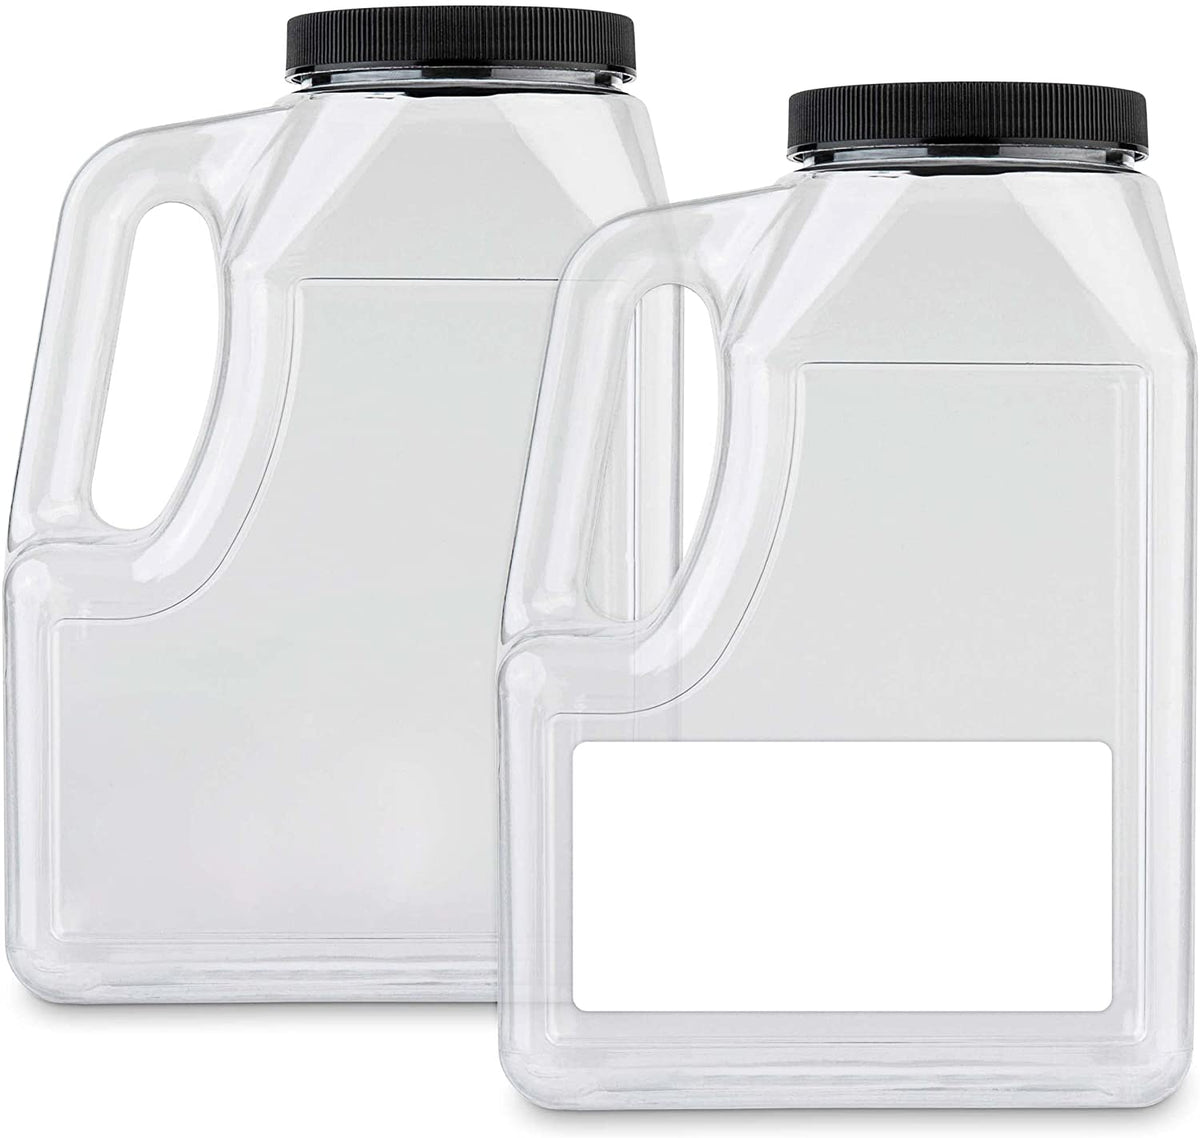 Stock Your Home Wide Mouth Gallon Jugs (2 Pack) - 128 Ounce Rectangular  Oblong Gallon Container - Clear Plastic Jugs with Handle for Home,  Commercial